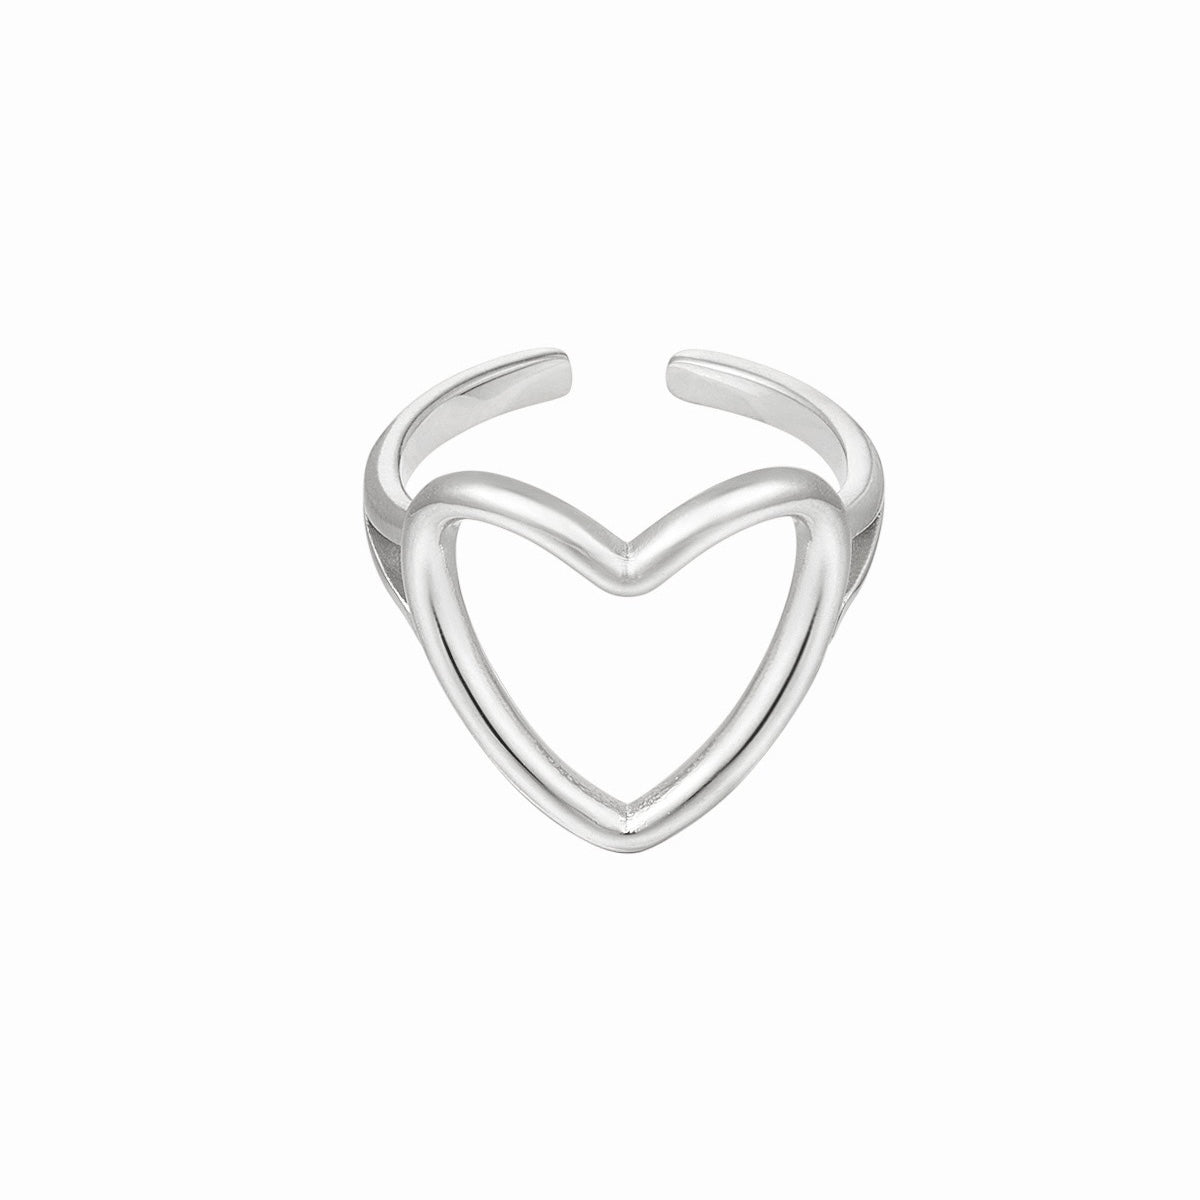 Amore Heart Ring - Silver